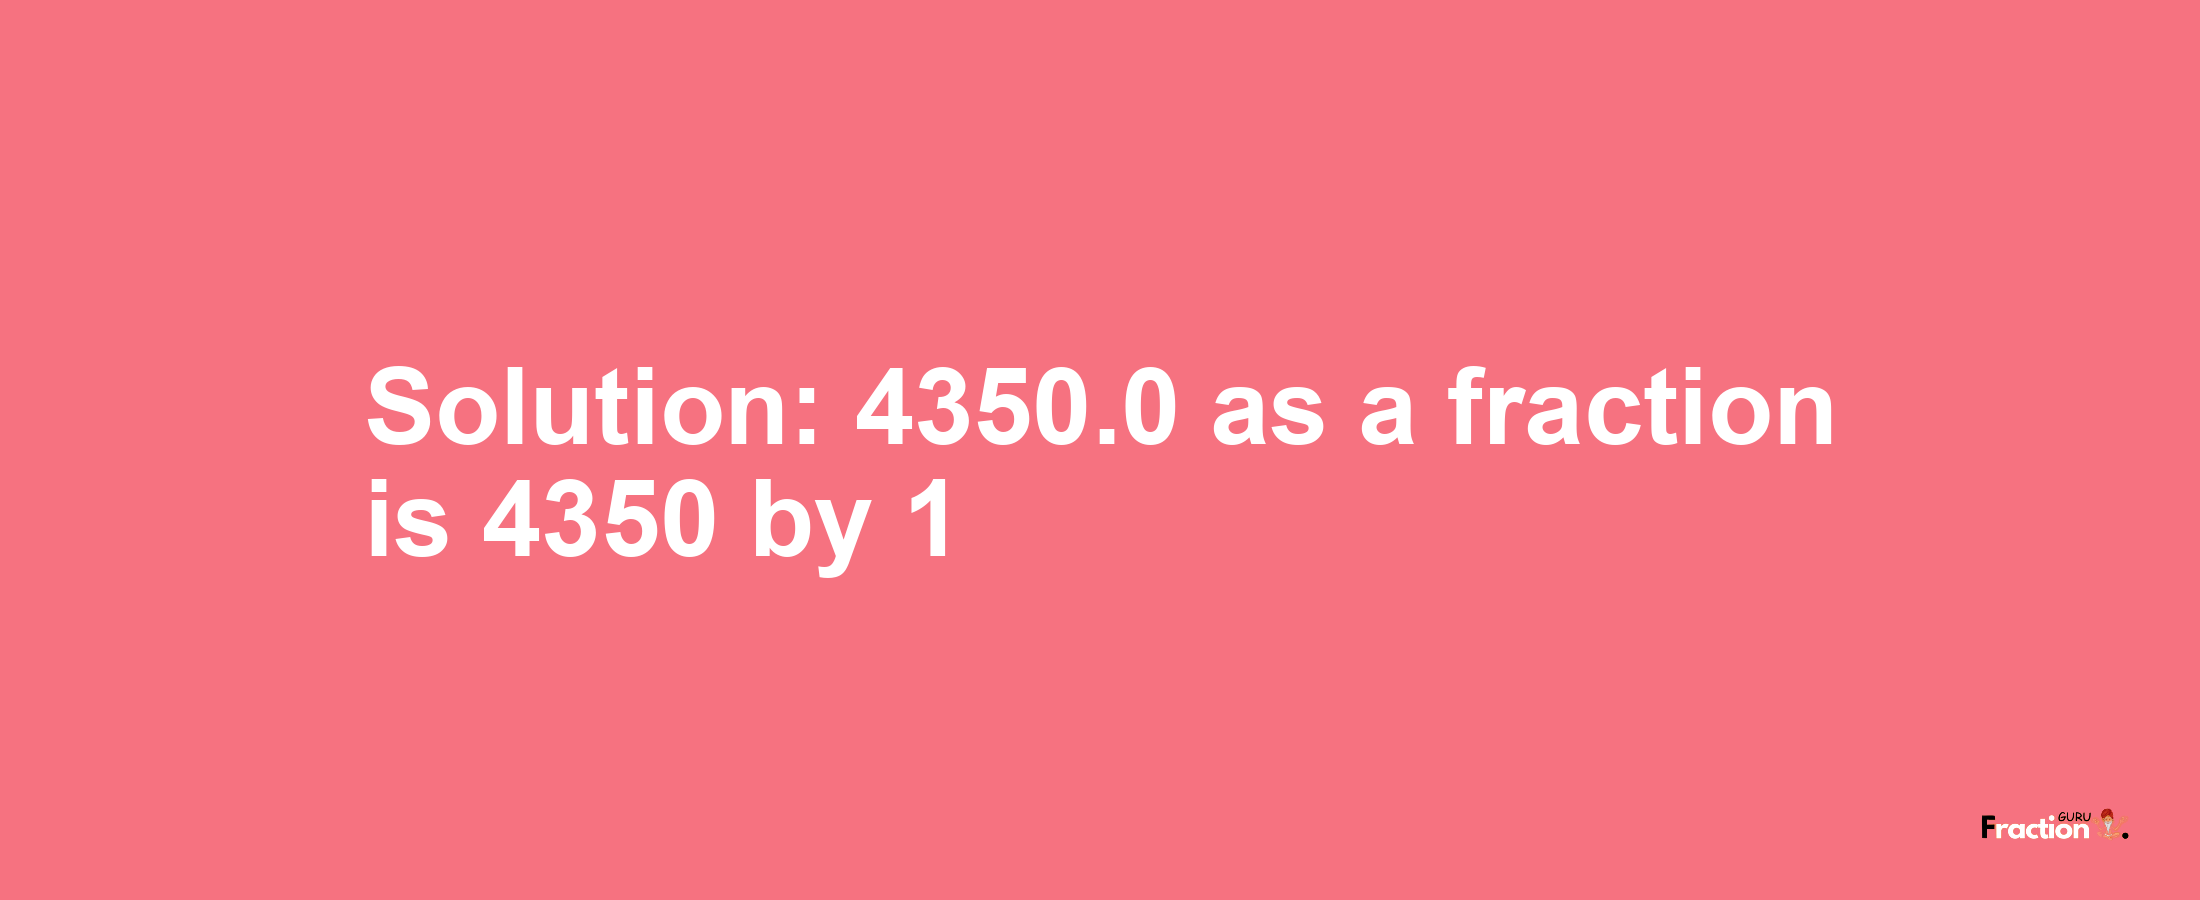 Solution:4350.0 as a fraction is 4350/1